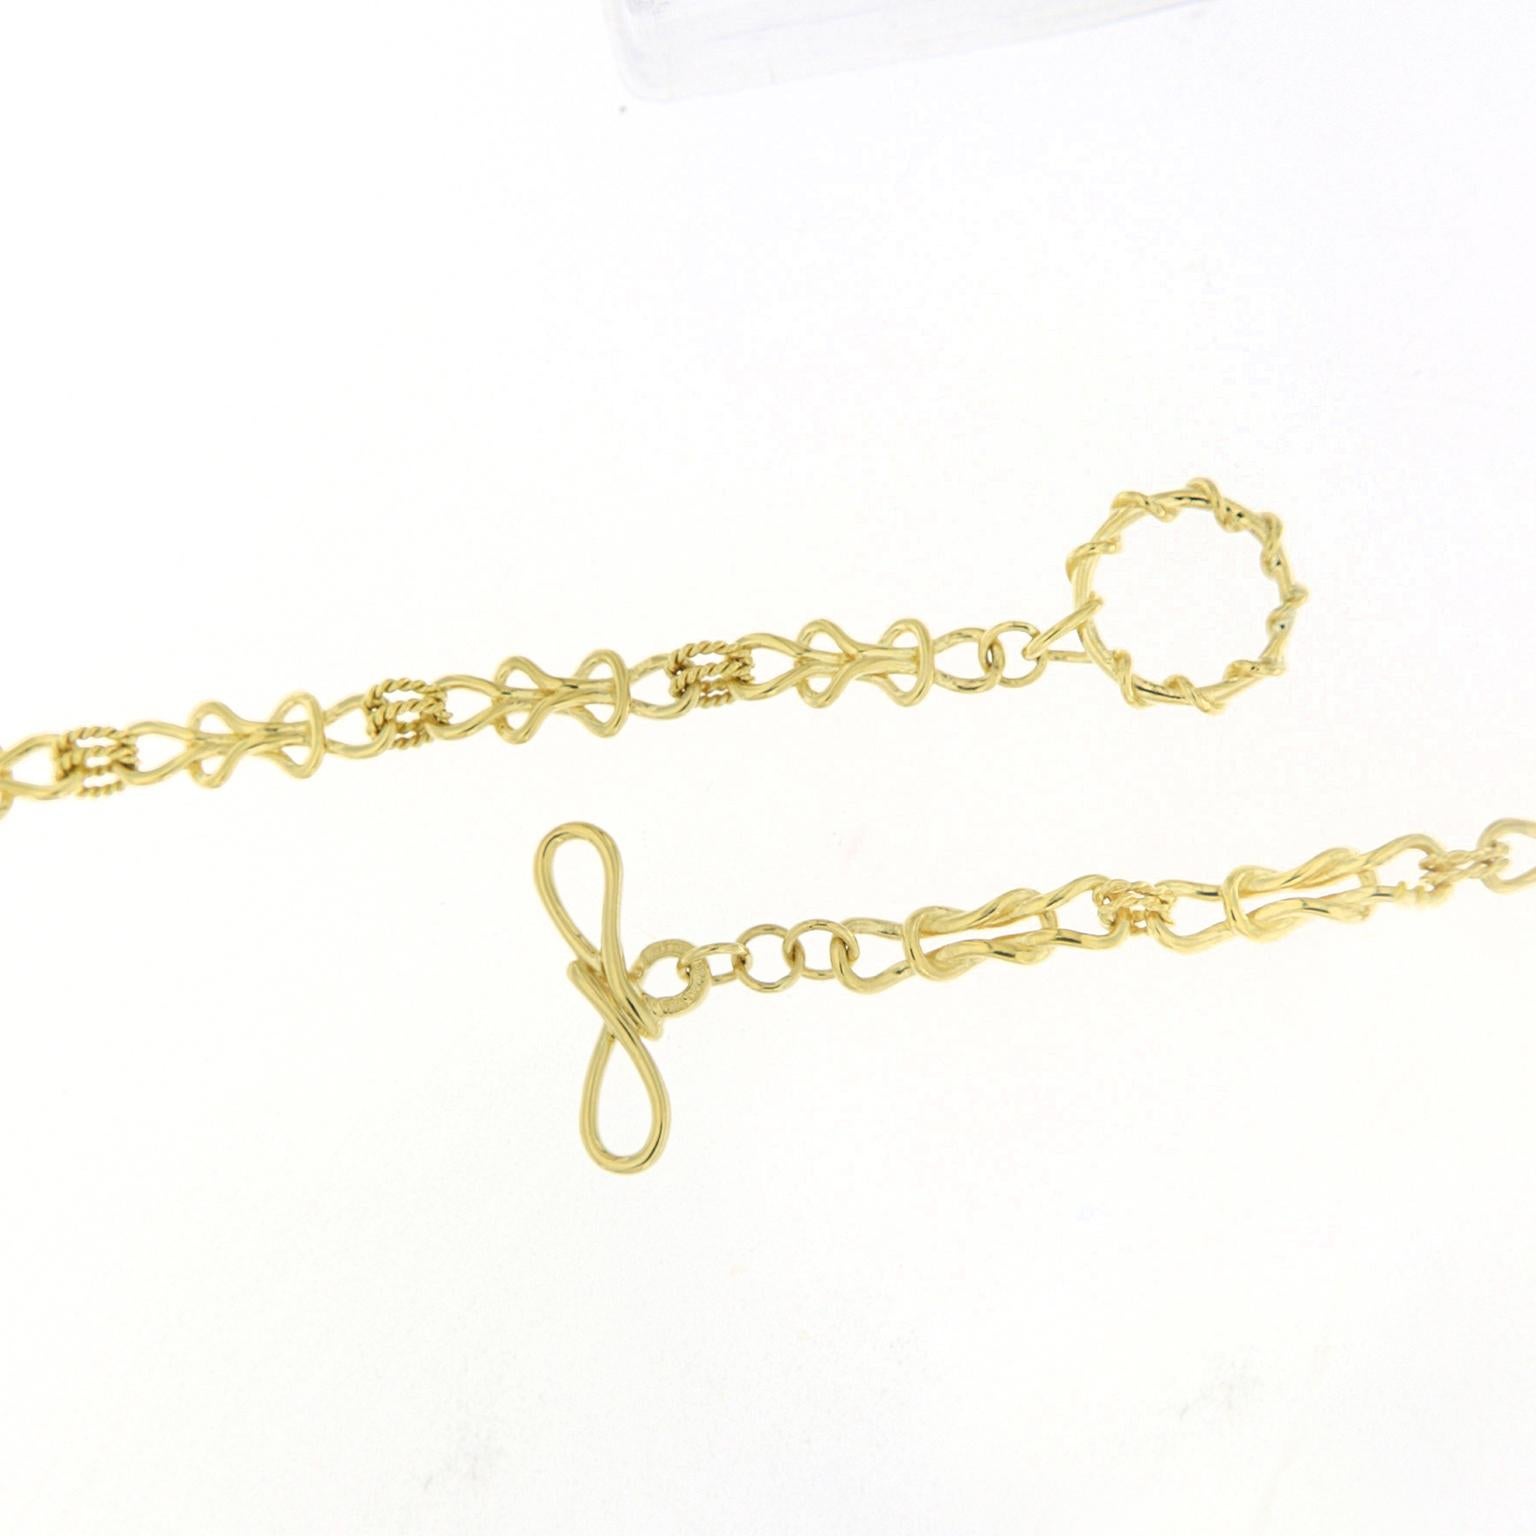 Women's or Men's 18K Yellow Gold Nautical Necklace